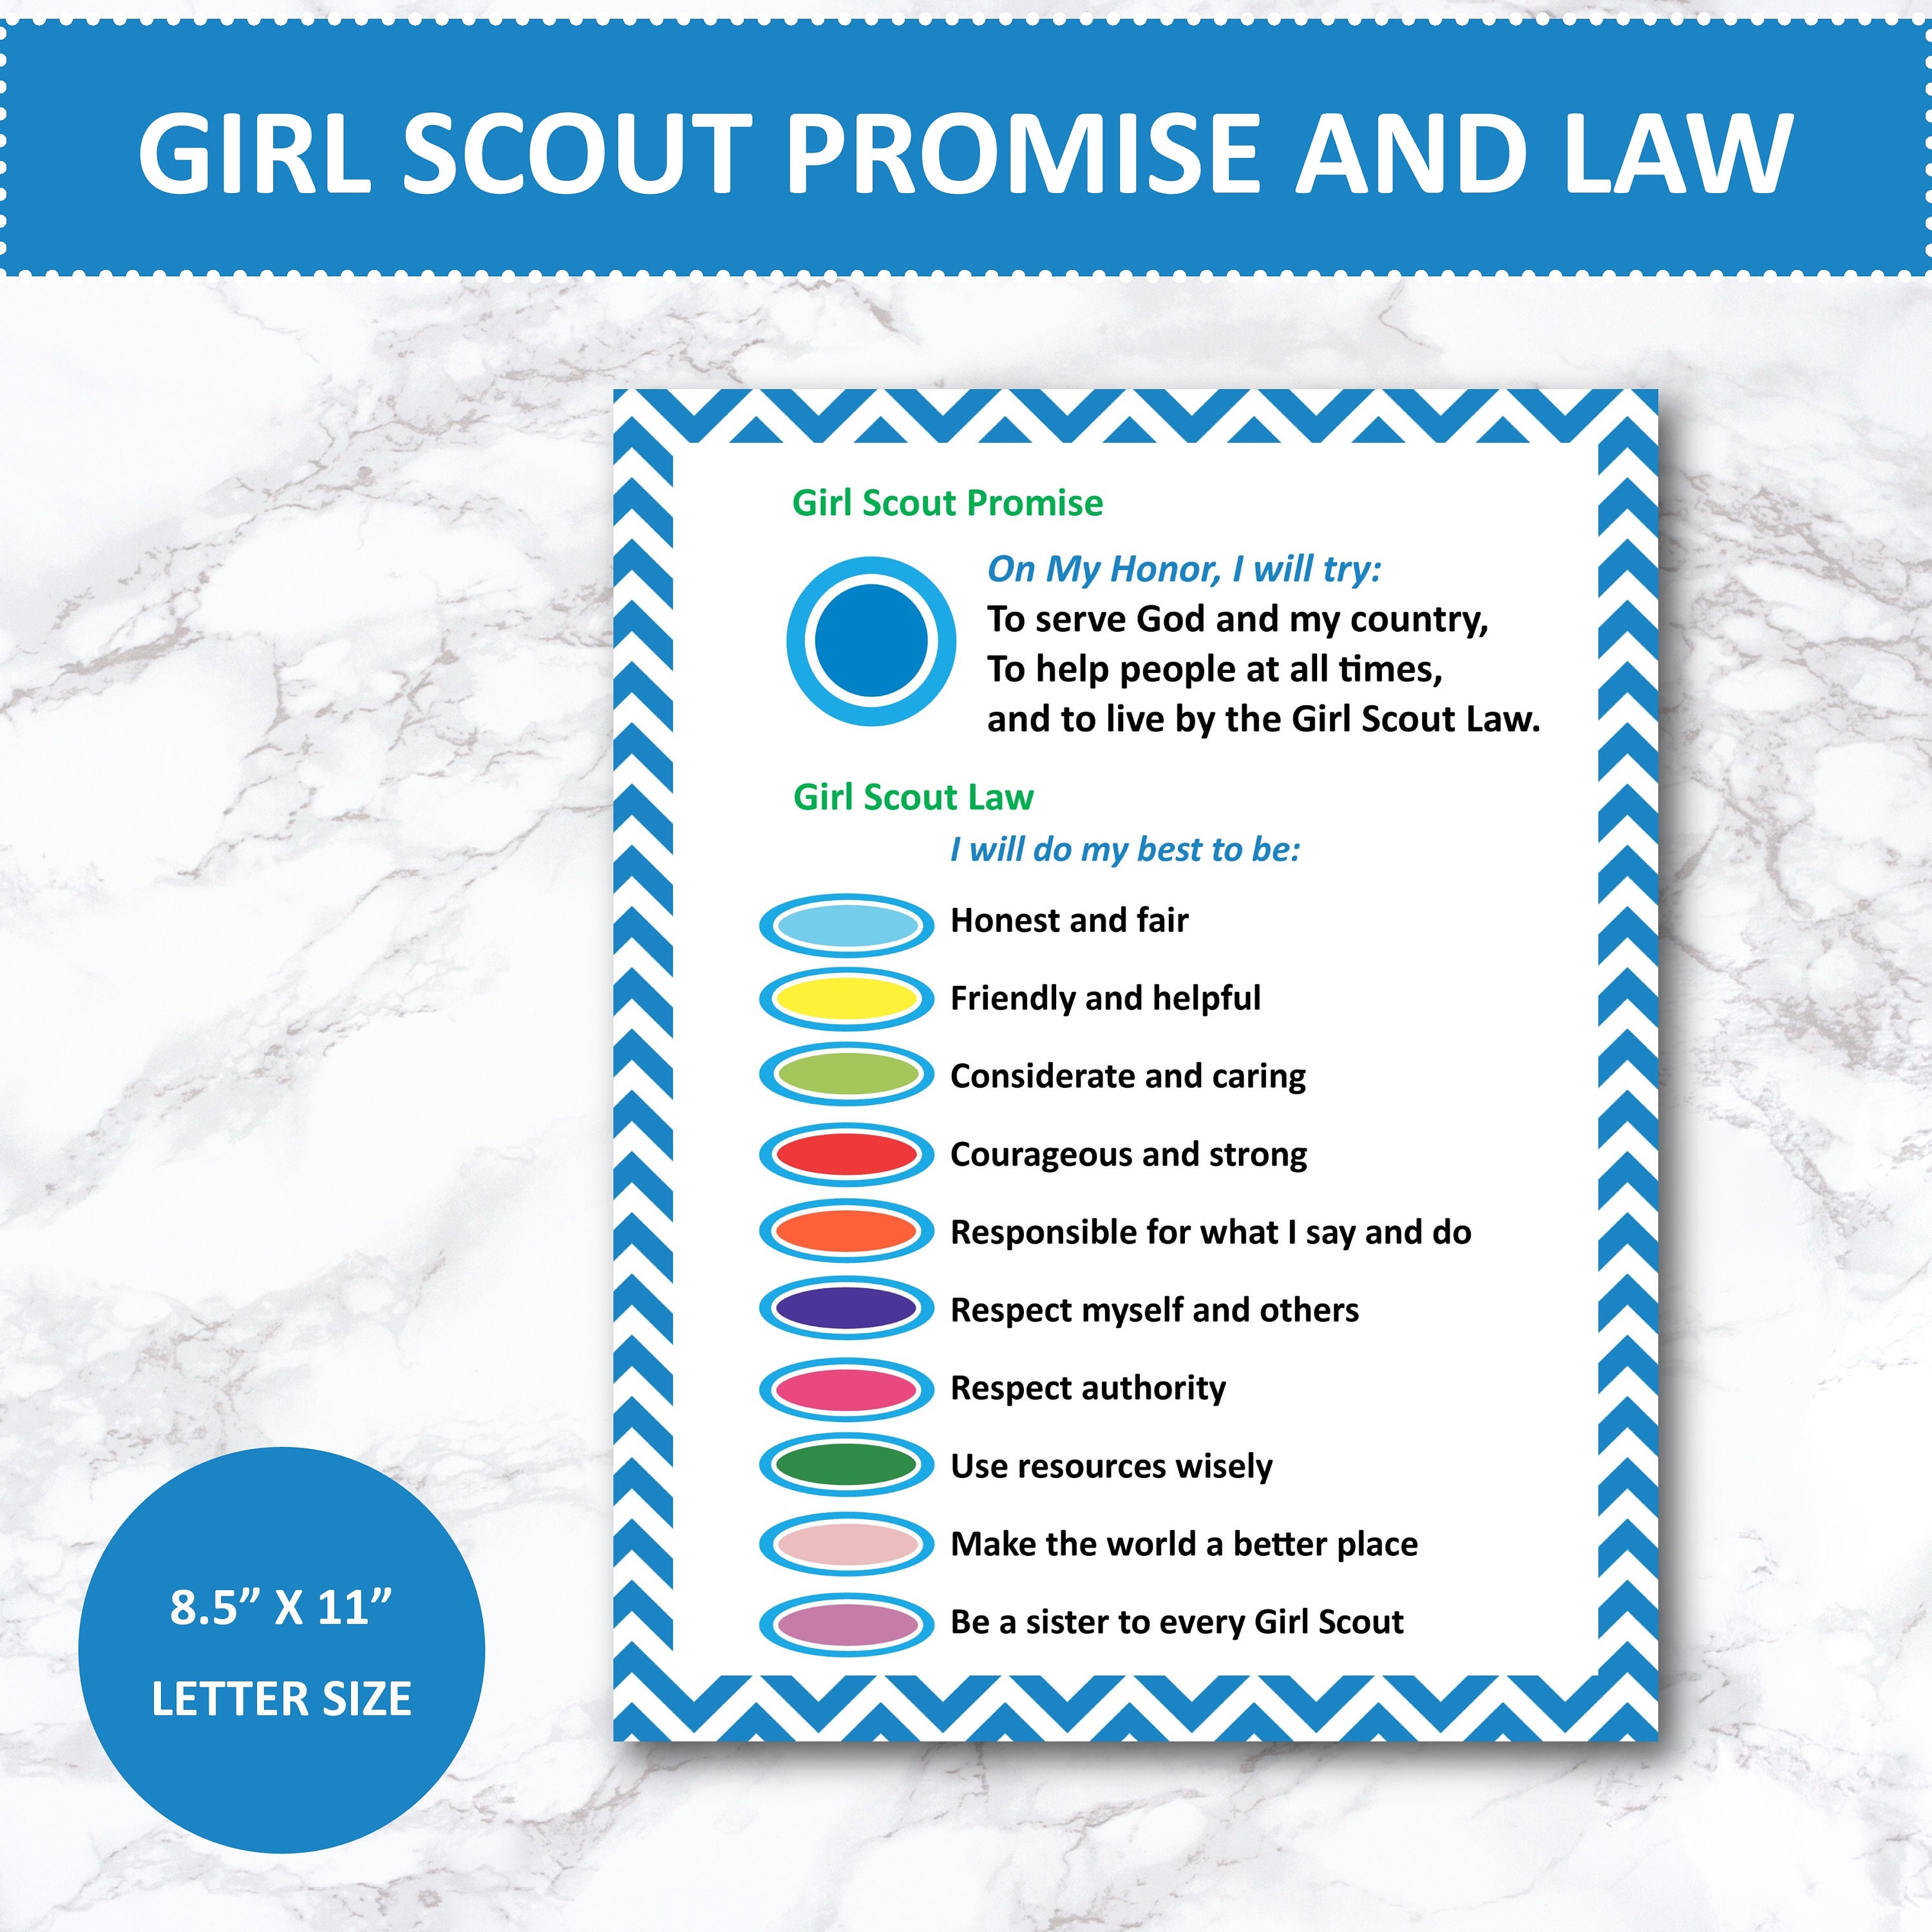 girl-scout-promise-and-law-printable-daisy-girl-scout-daisy-etsy-canada